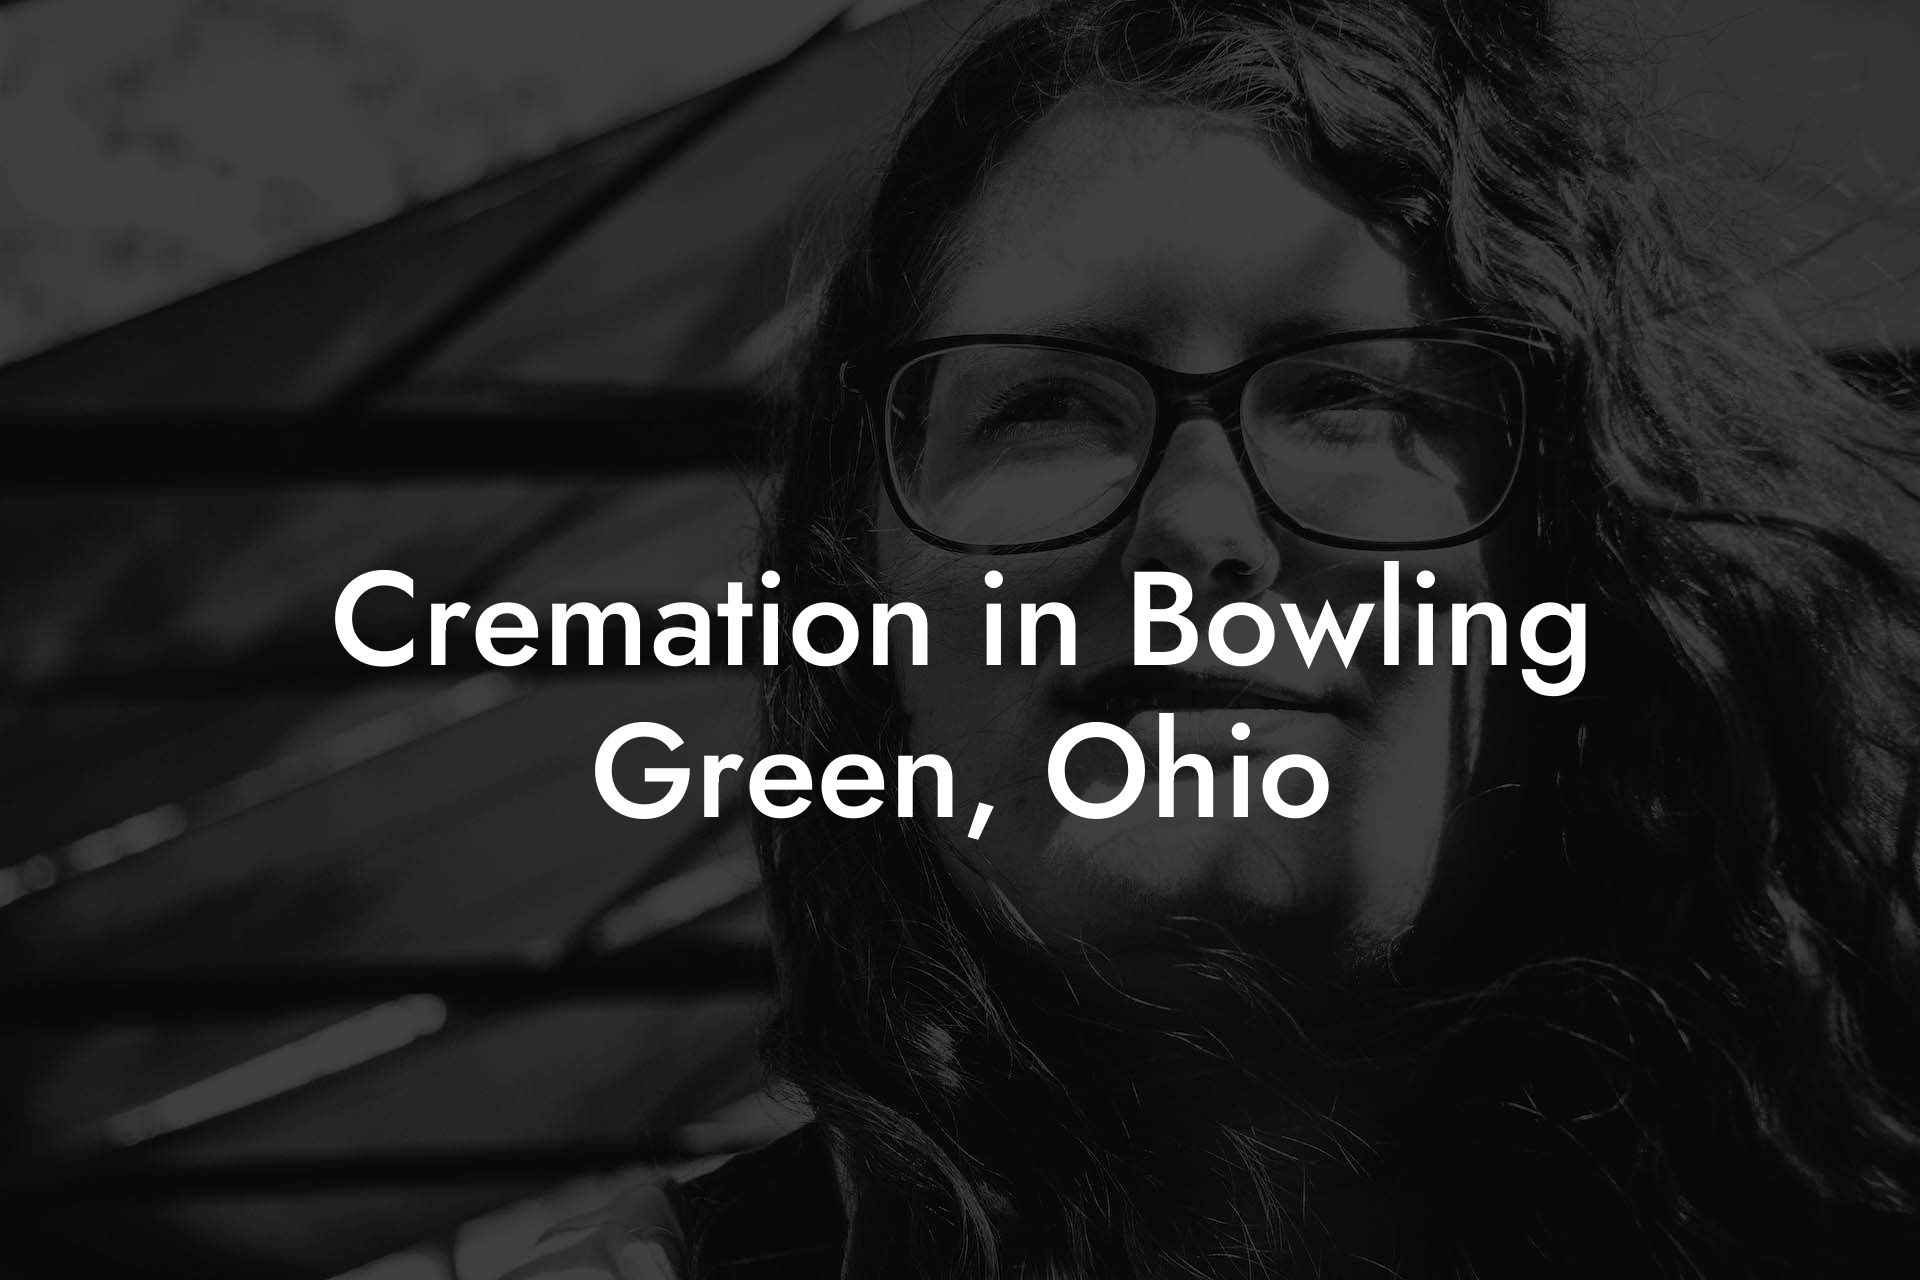 Cremation in Bowling Green, Ohio